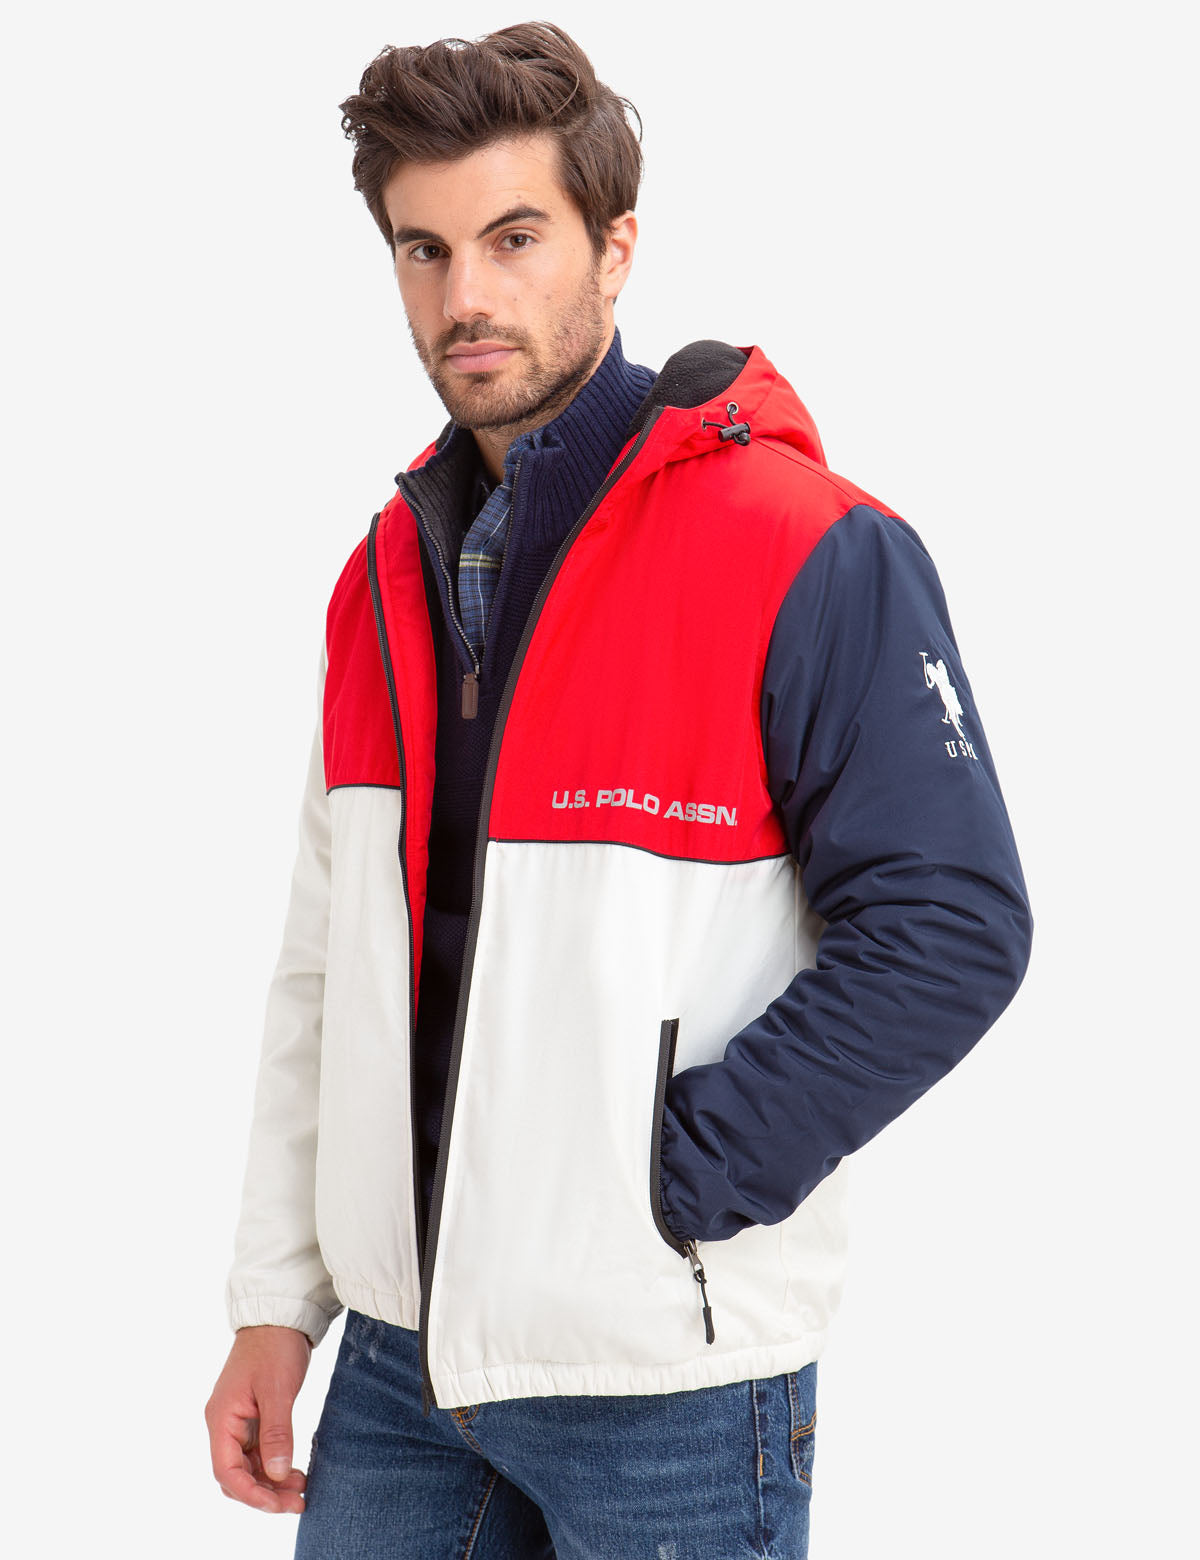 us polo assn red jacket